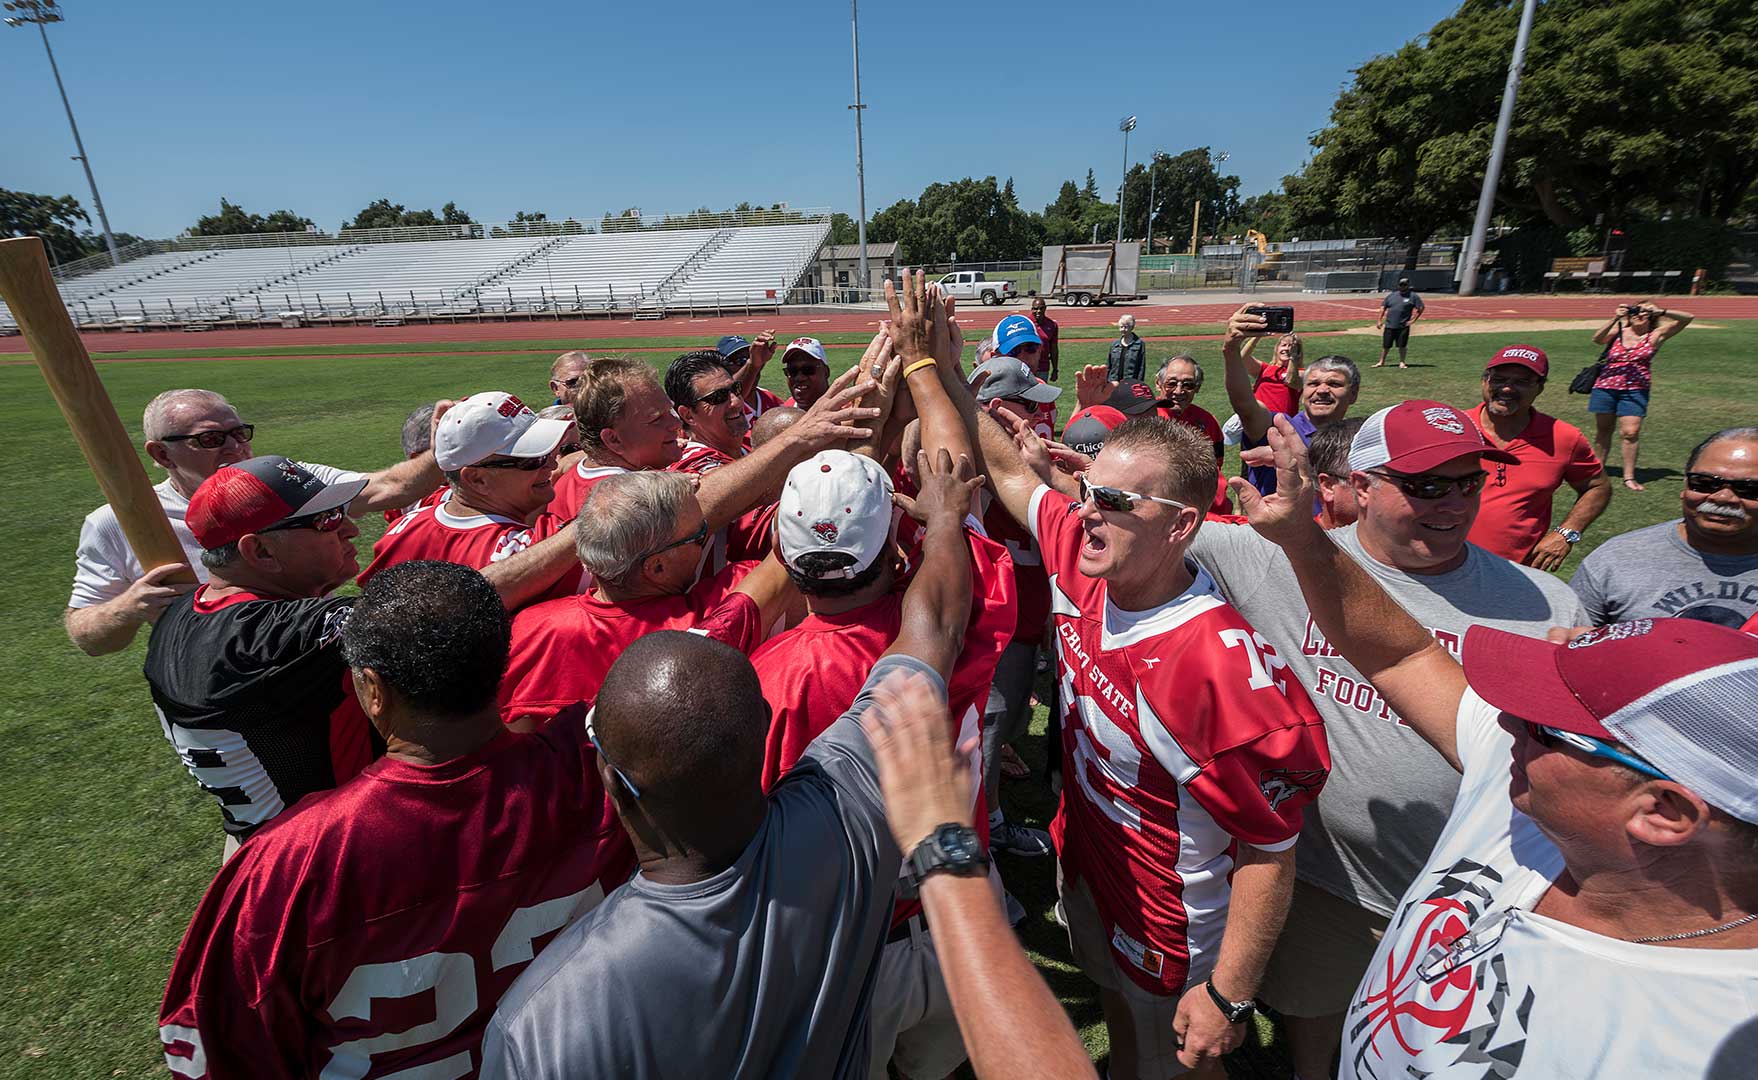 Wildcat alumni of the Chico State football team came back to the field during their three-day reunion to reminisce about their time playing the game.